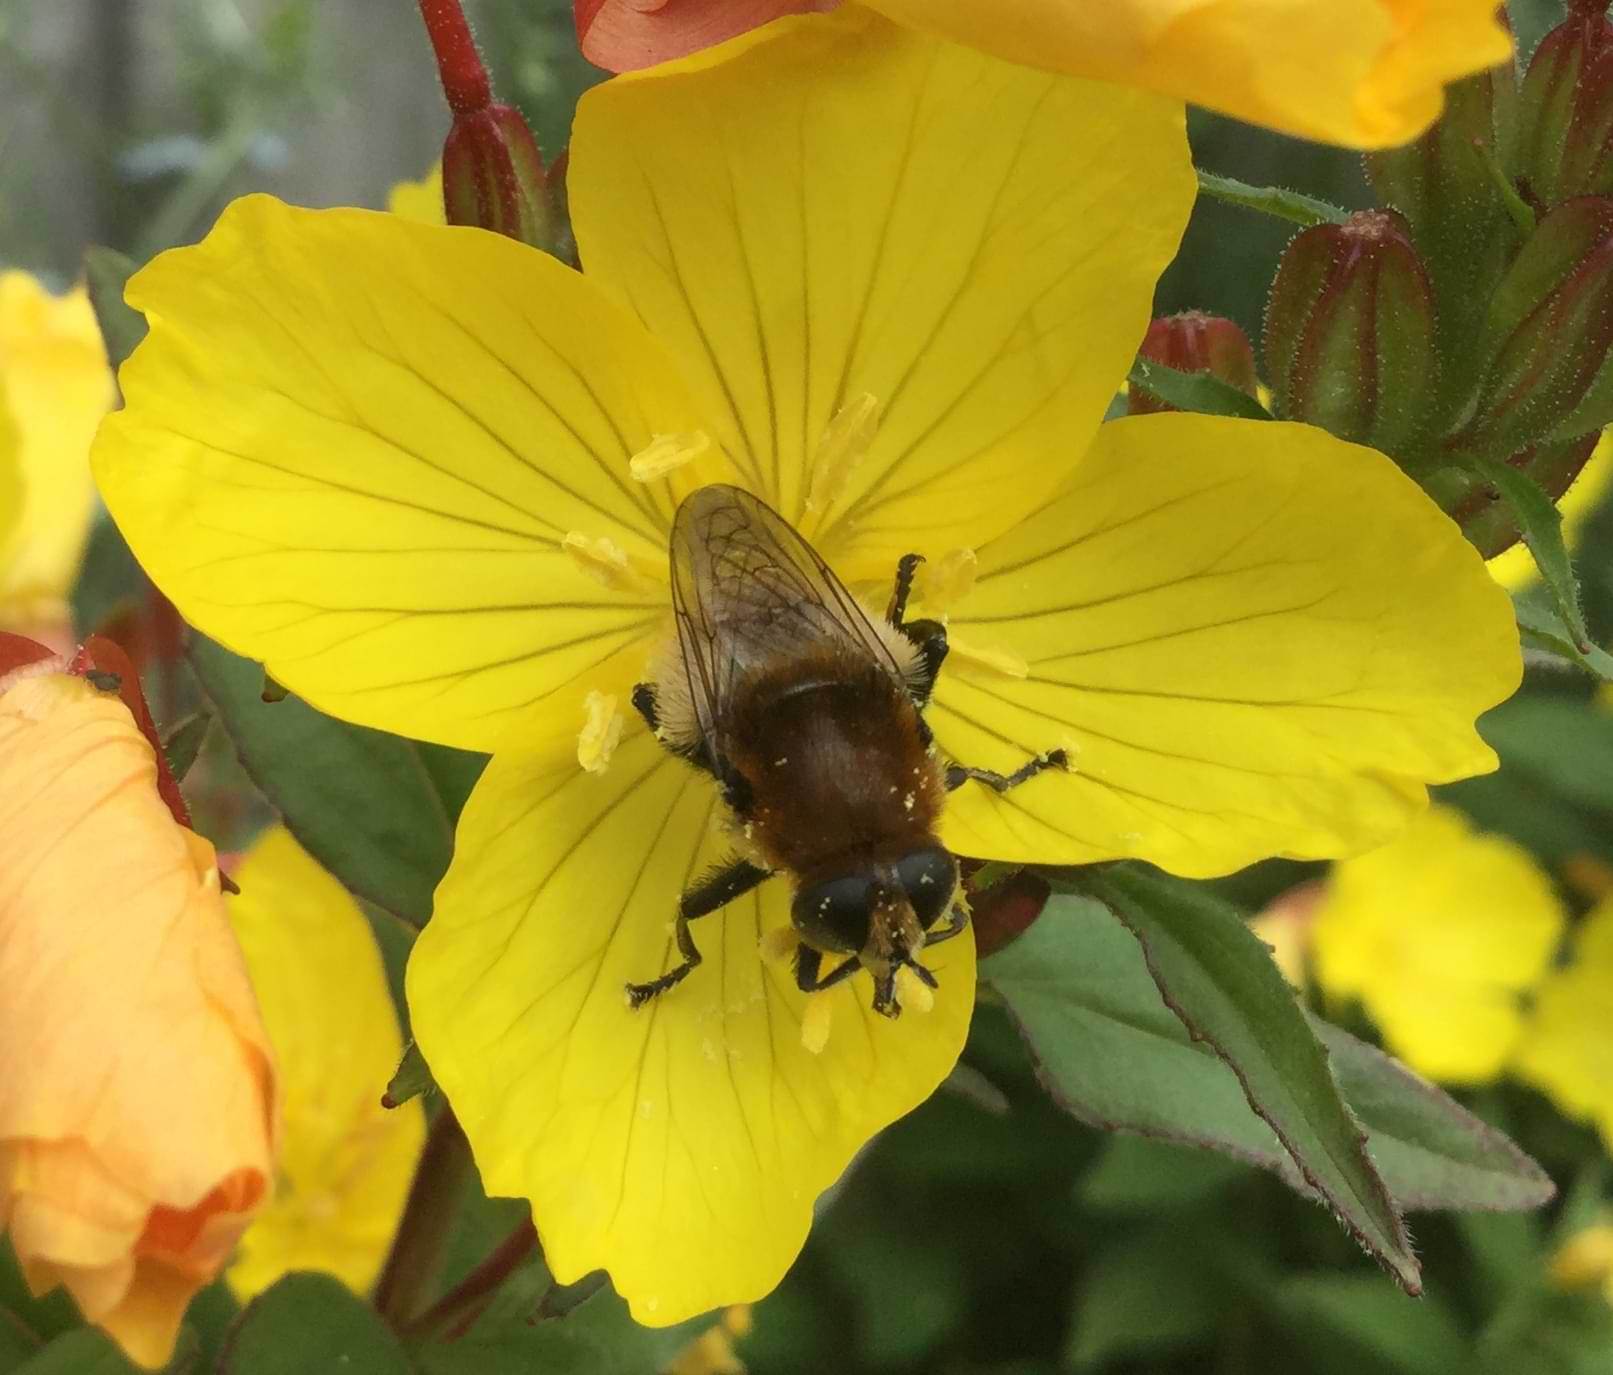 A bee-like fly sitting on a yellow flower. Tiny flecks of pollen are stuck to its face and body.